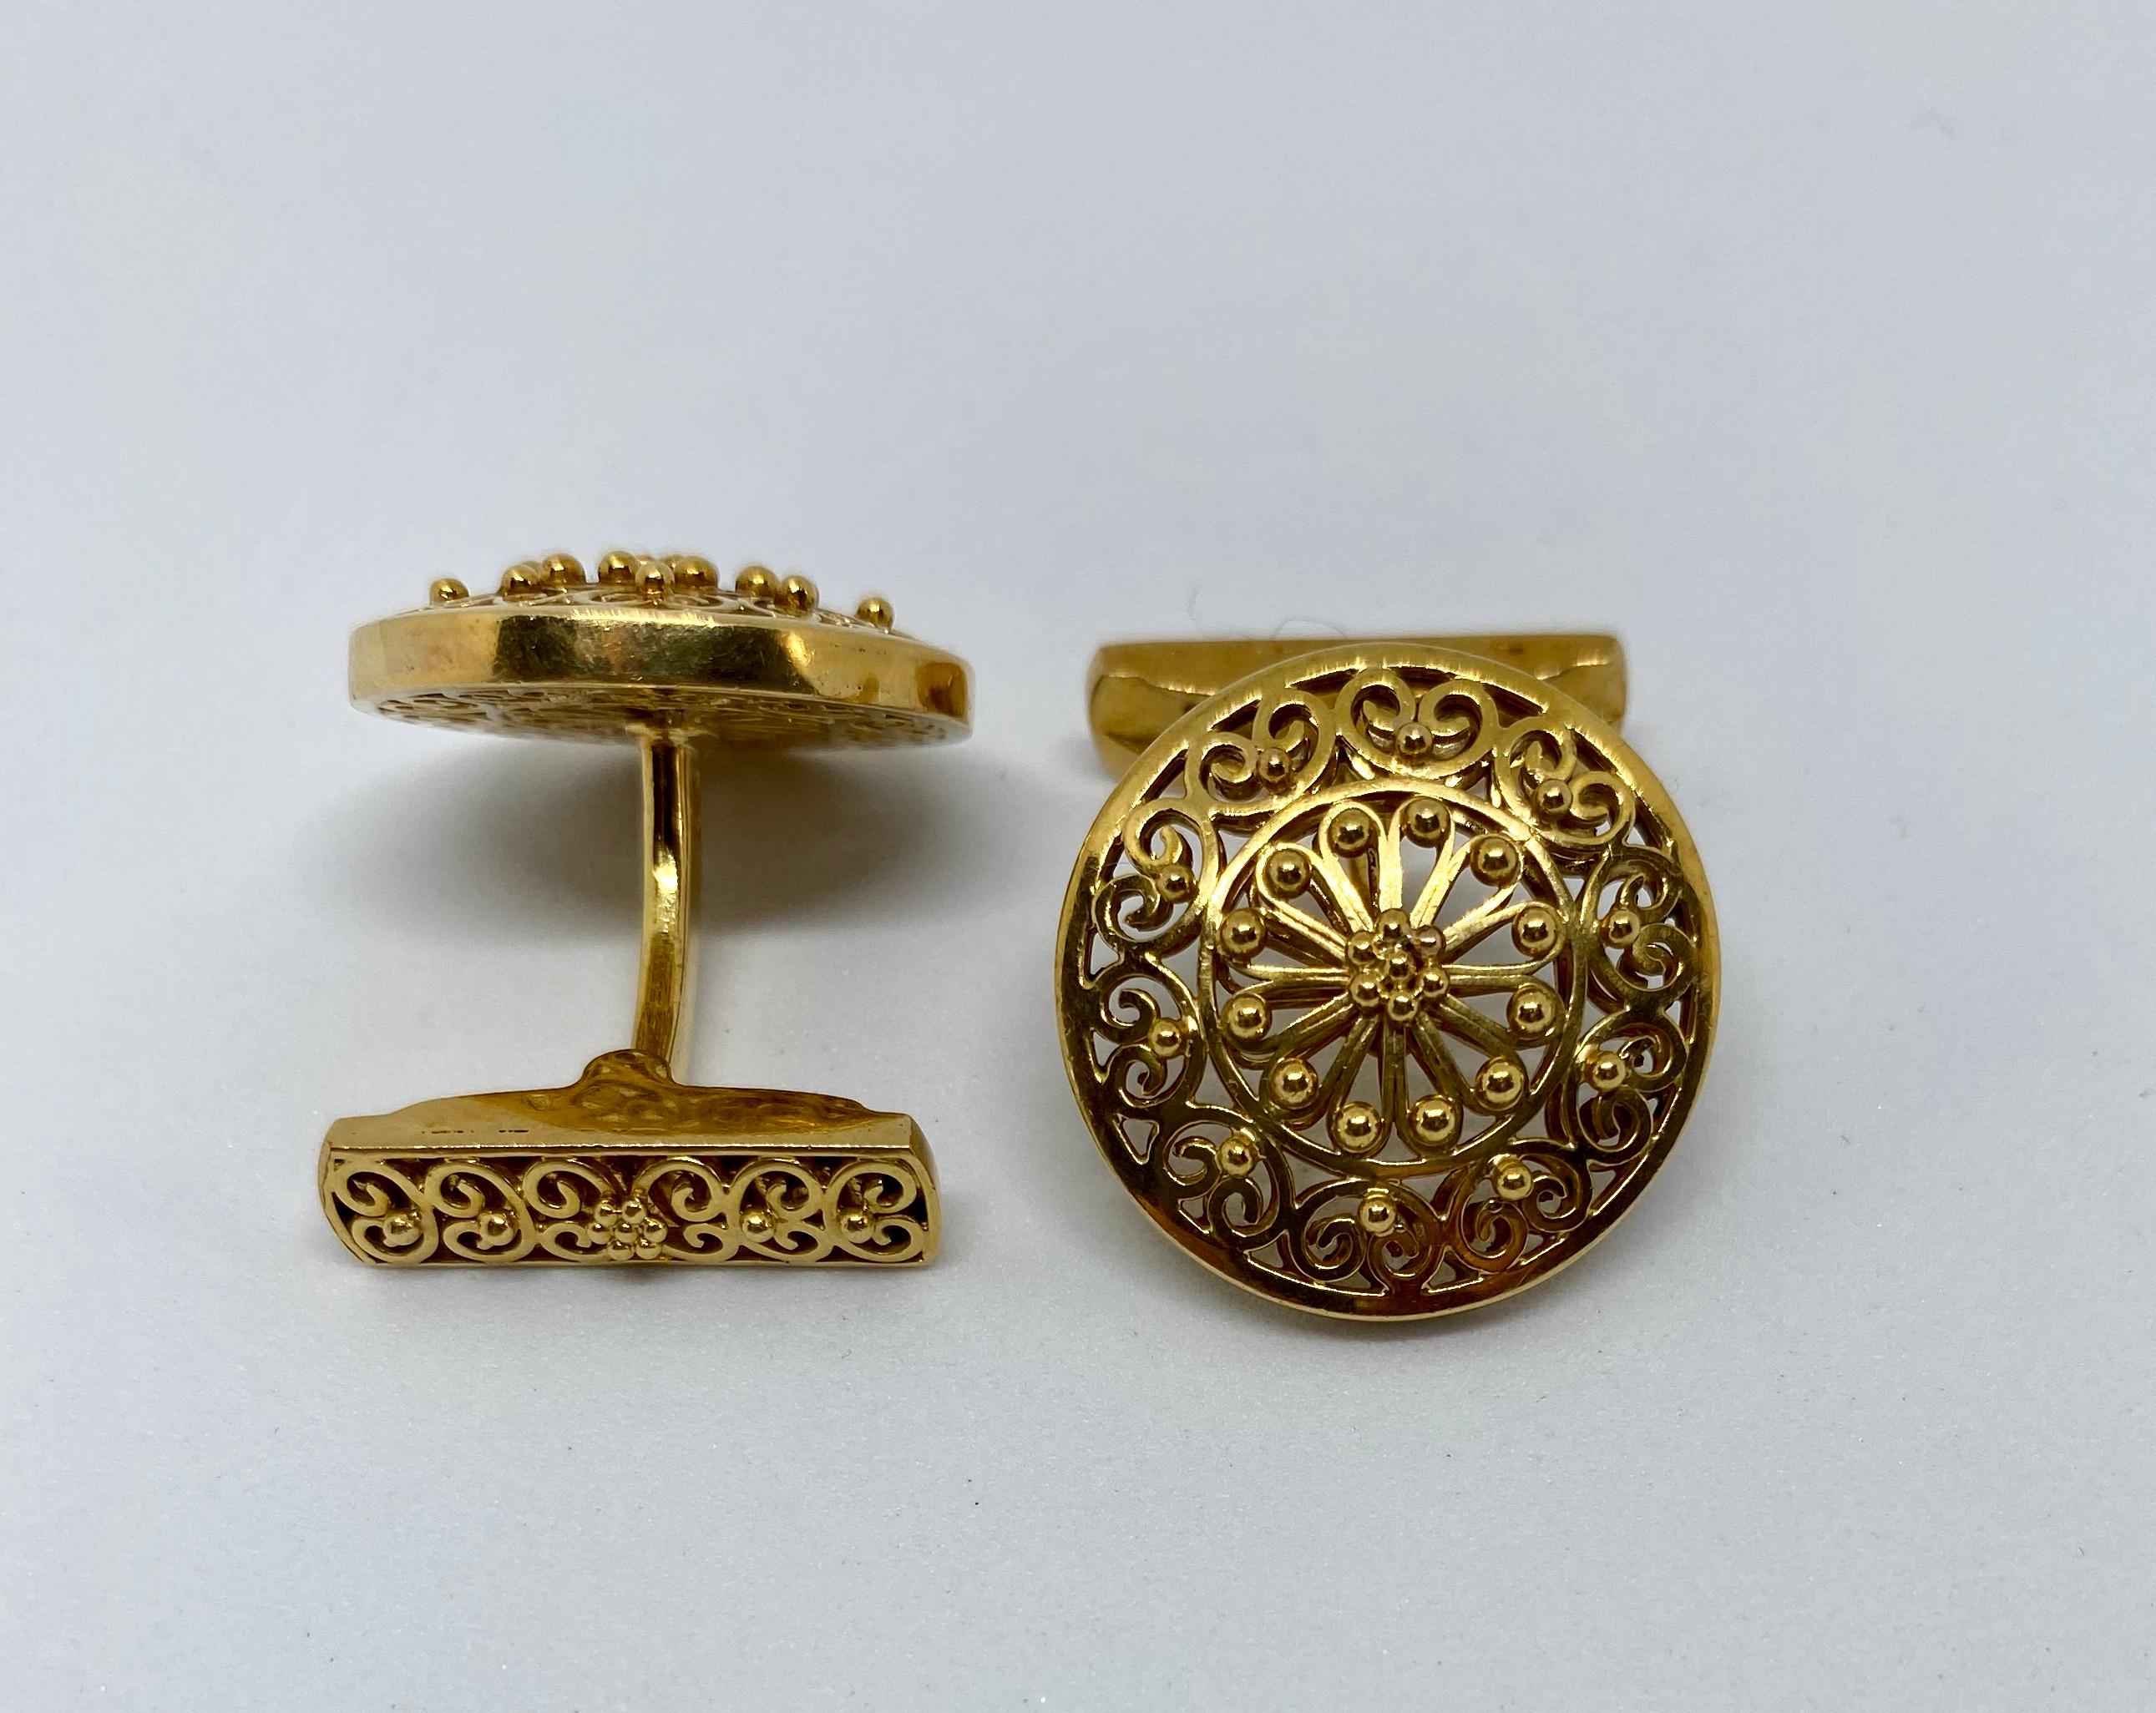 Spectacular vintage cufflinks made in Portugal, where the gold standard is higher than the rest of Europe, at .800 or 19.2 karat.

The workmanship is outstanding. The cufflinks feature openwork circles backed with matching openwork fasteners. Small